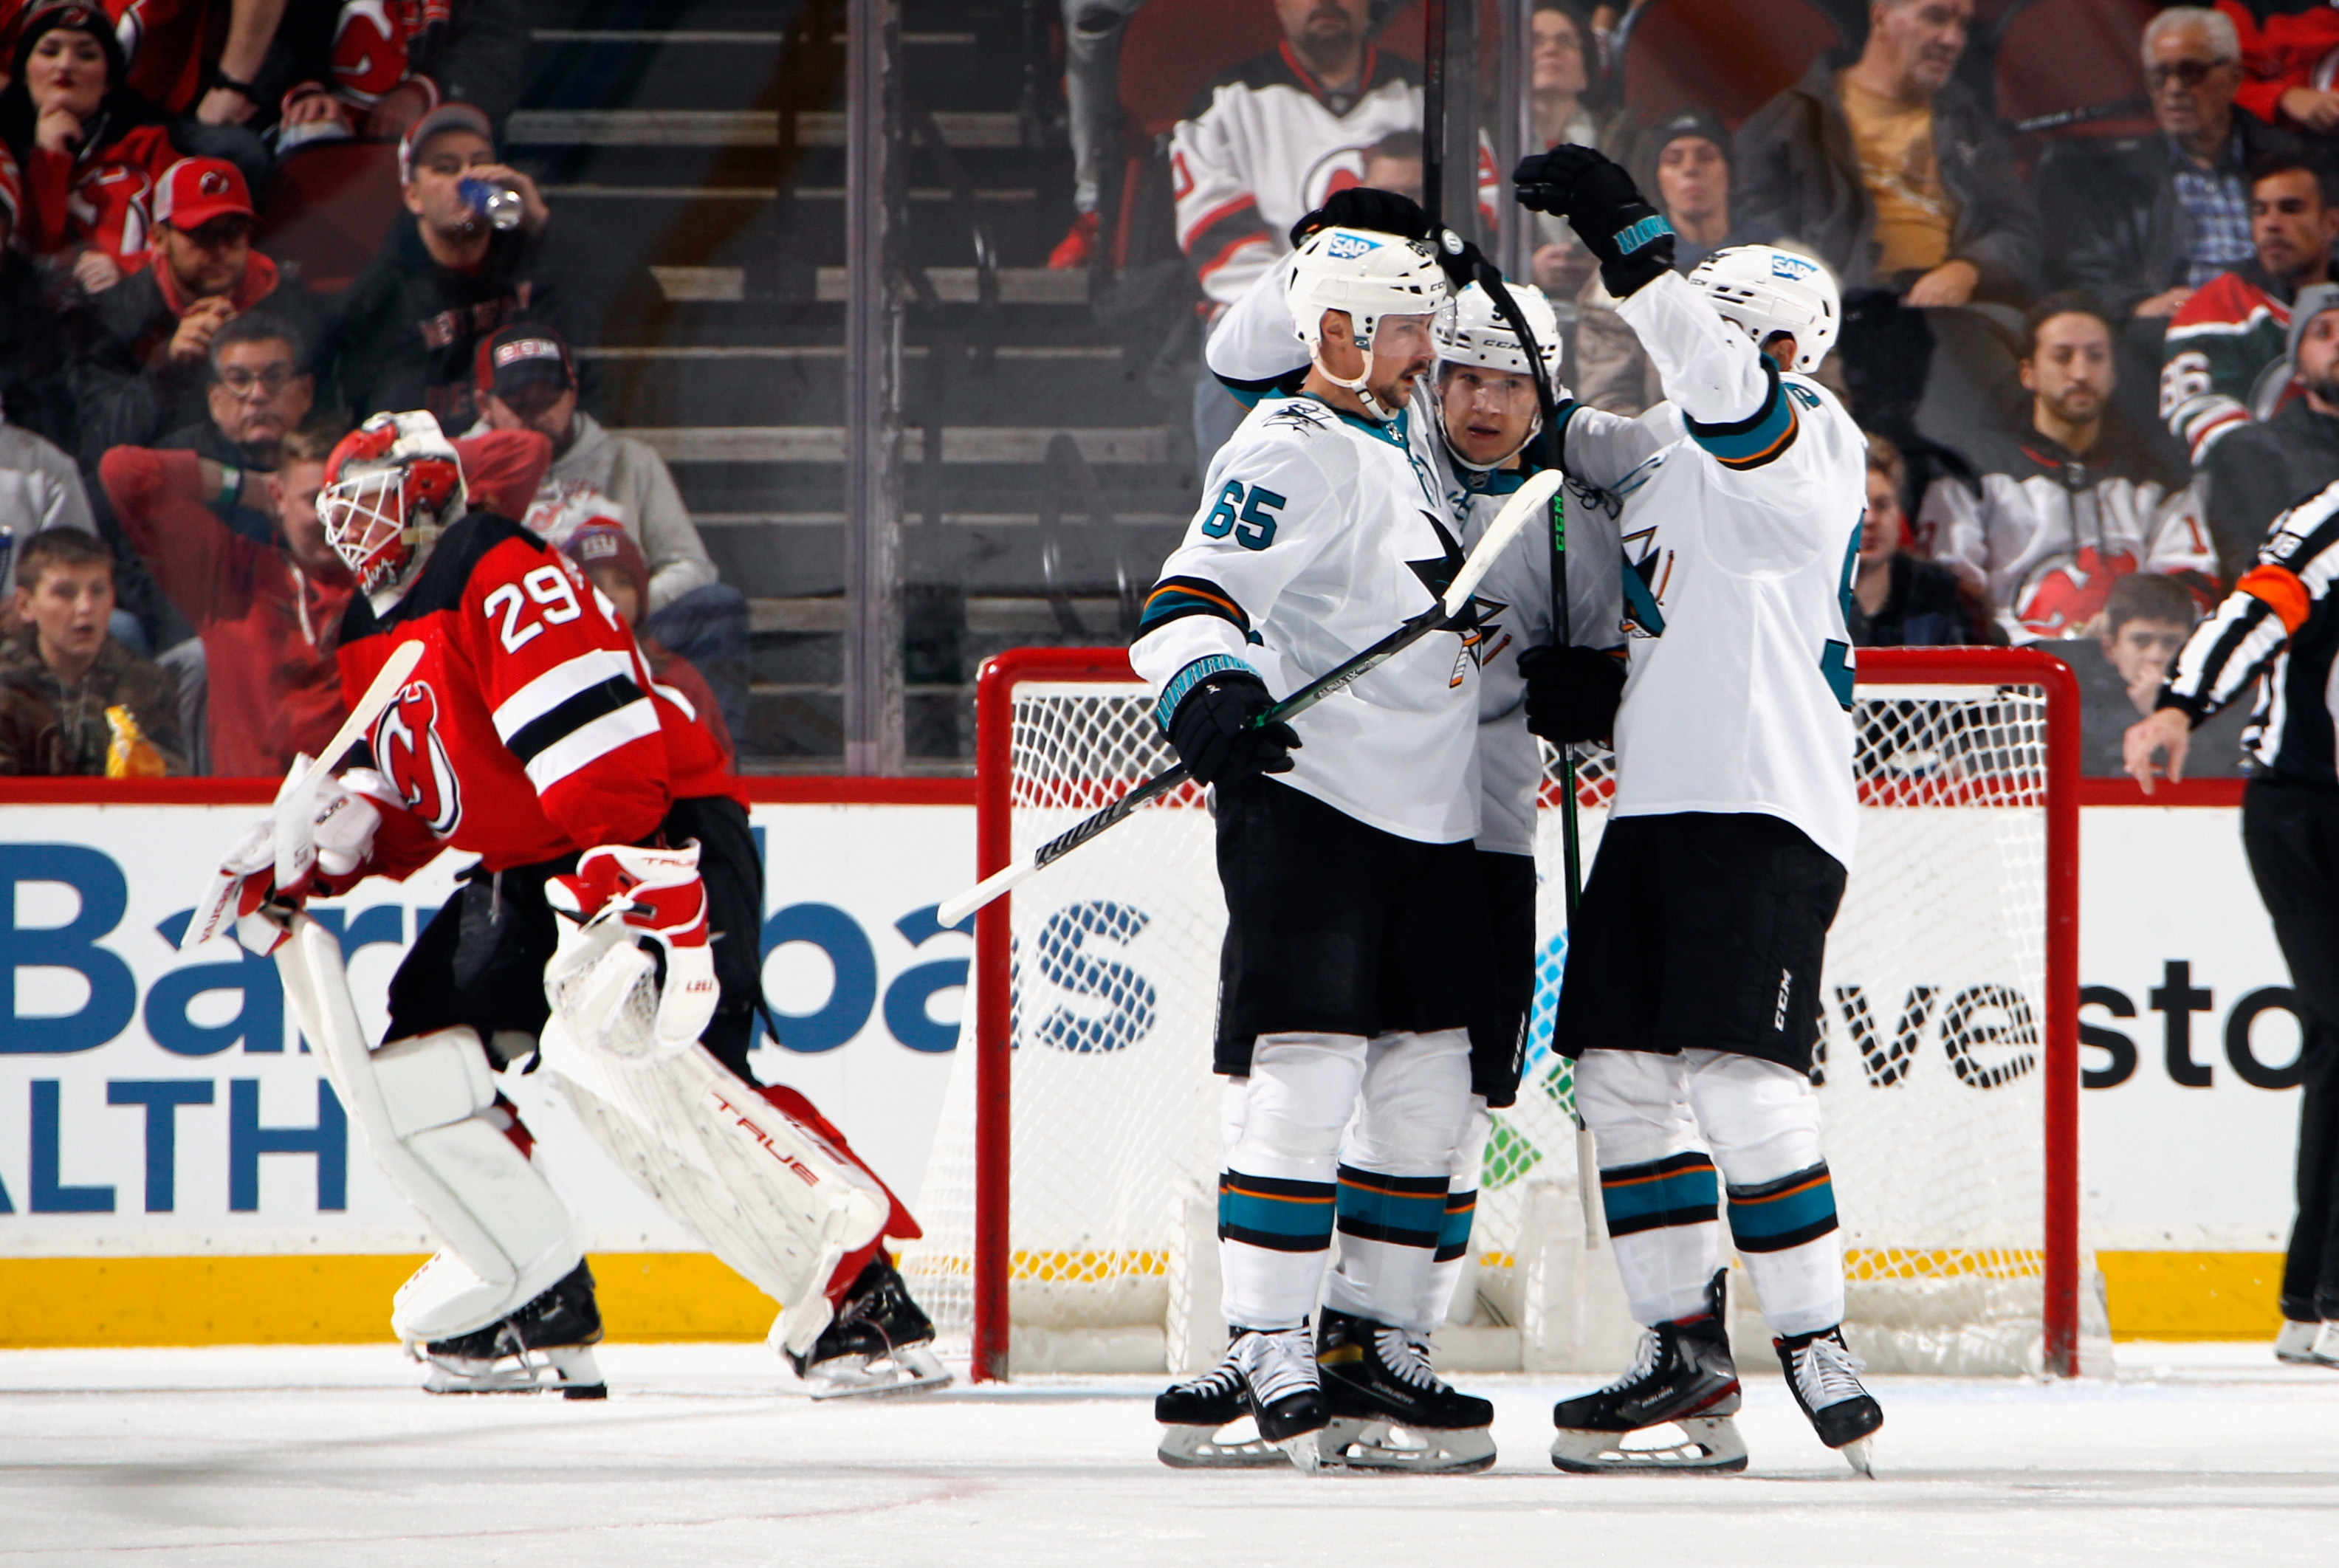 Erik Karlsson #65 of the San Jose Sharks (L) celebrates his second period goal against the New Jersey Devils at the Prudential Center on November 30, 2021 in Newark, New Jersey.